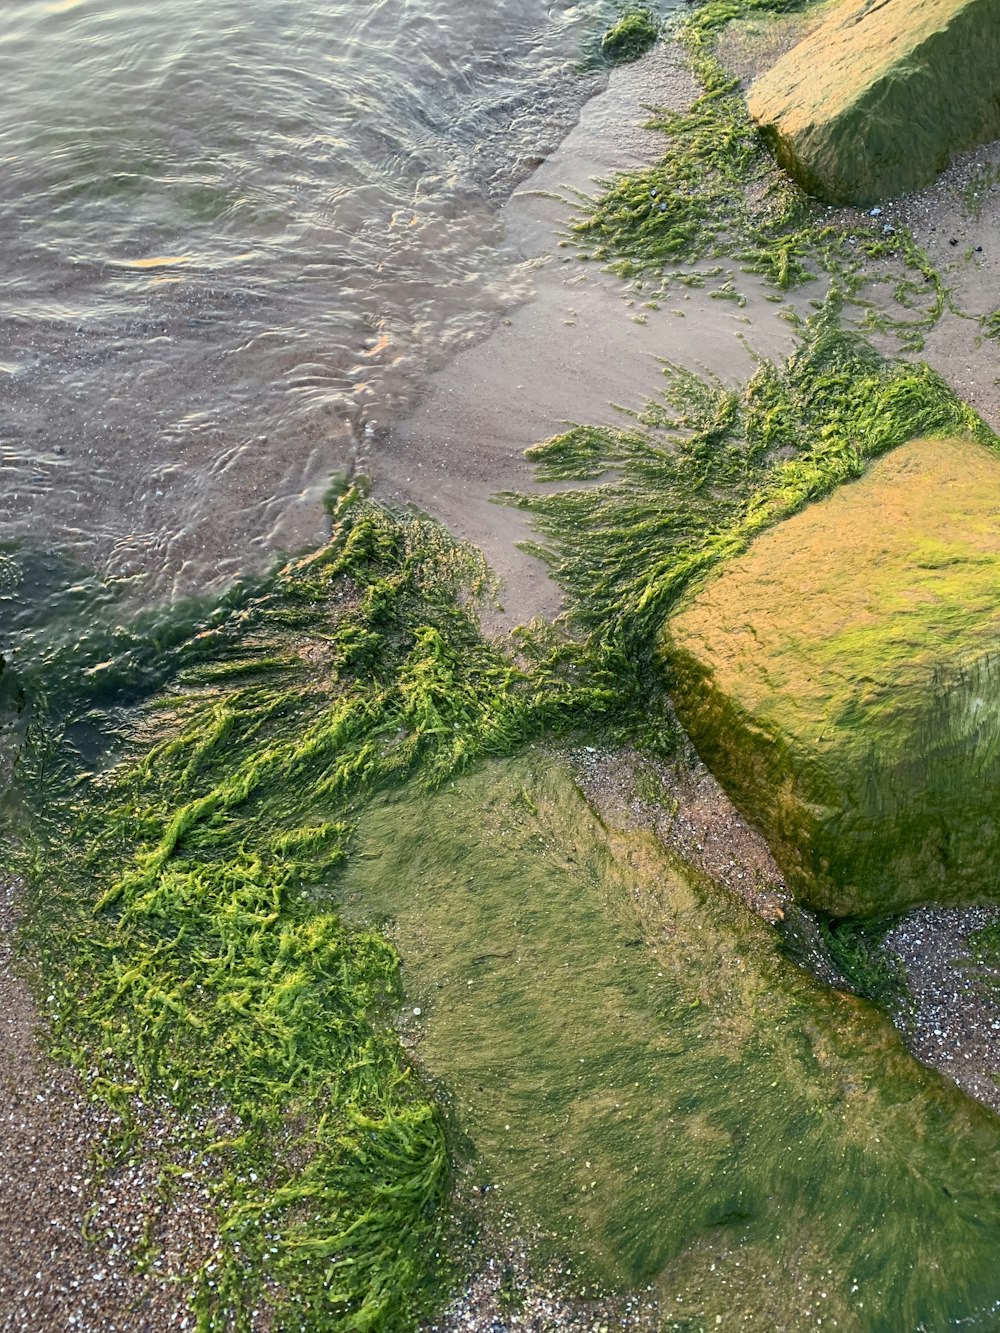 green algae growing on the shore of a body of water